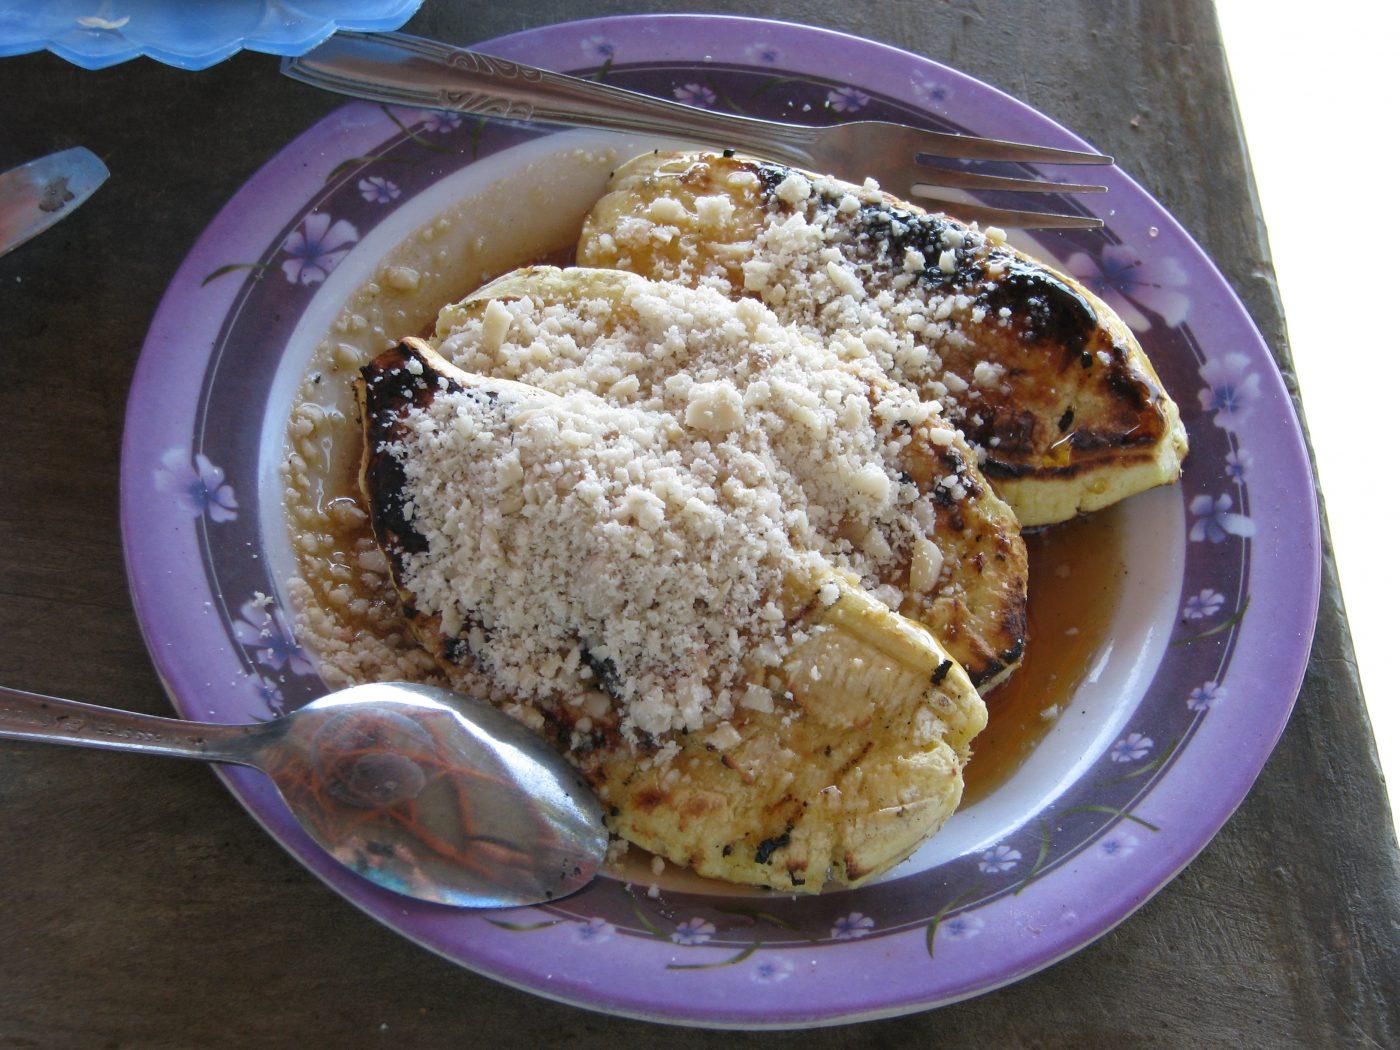 Three grilled bananas topped with chocolate and peanuts - a typical Kupang snack